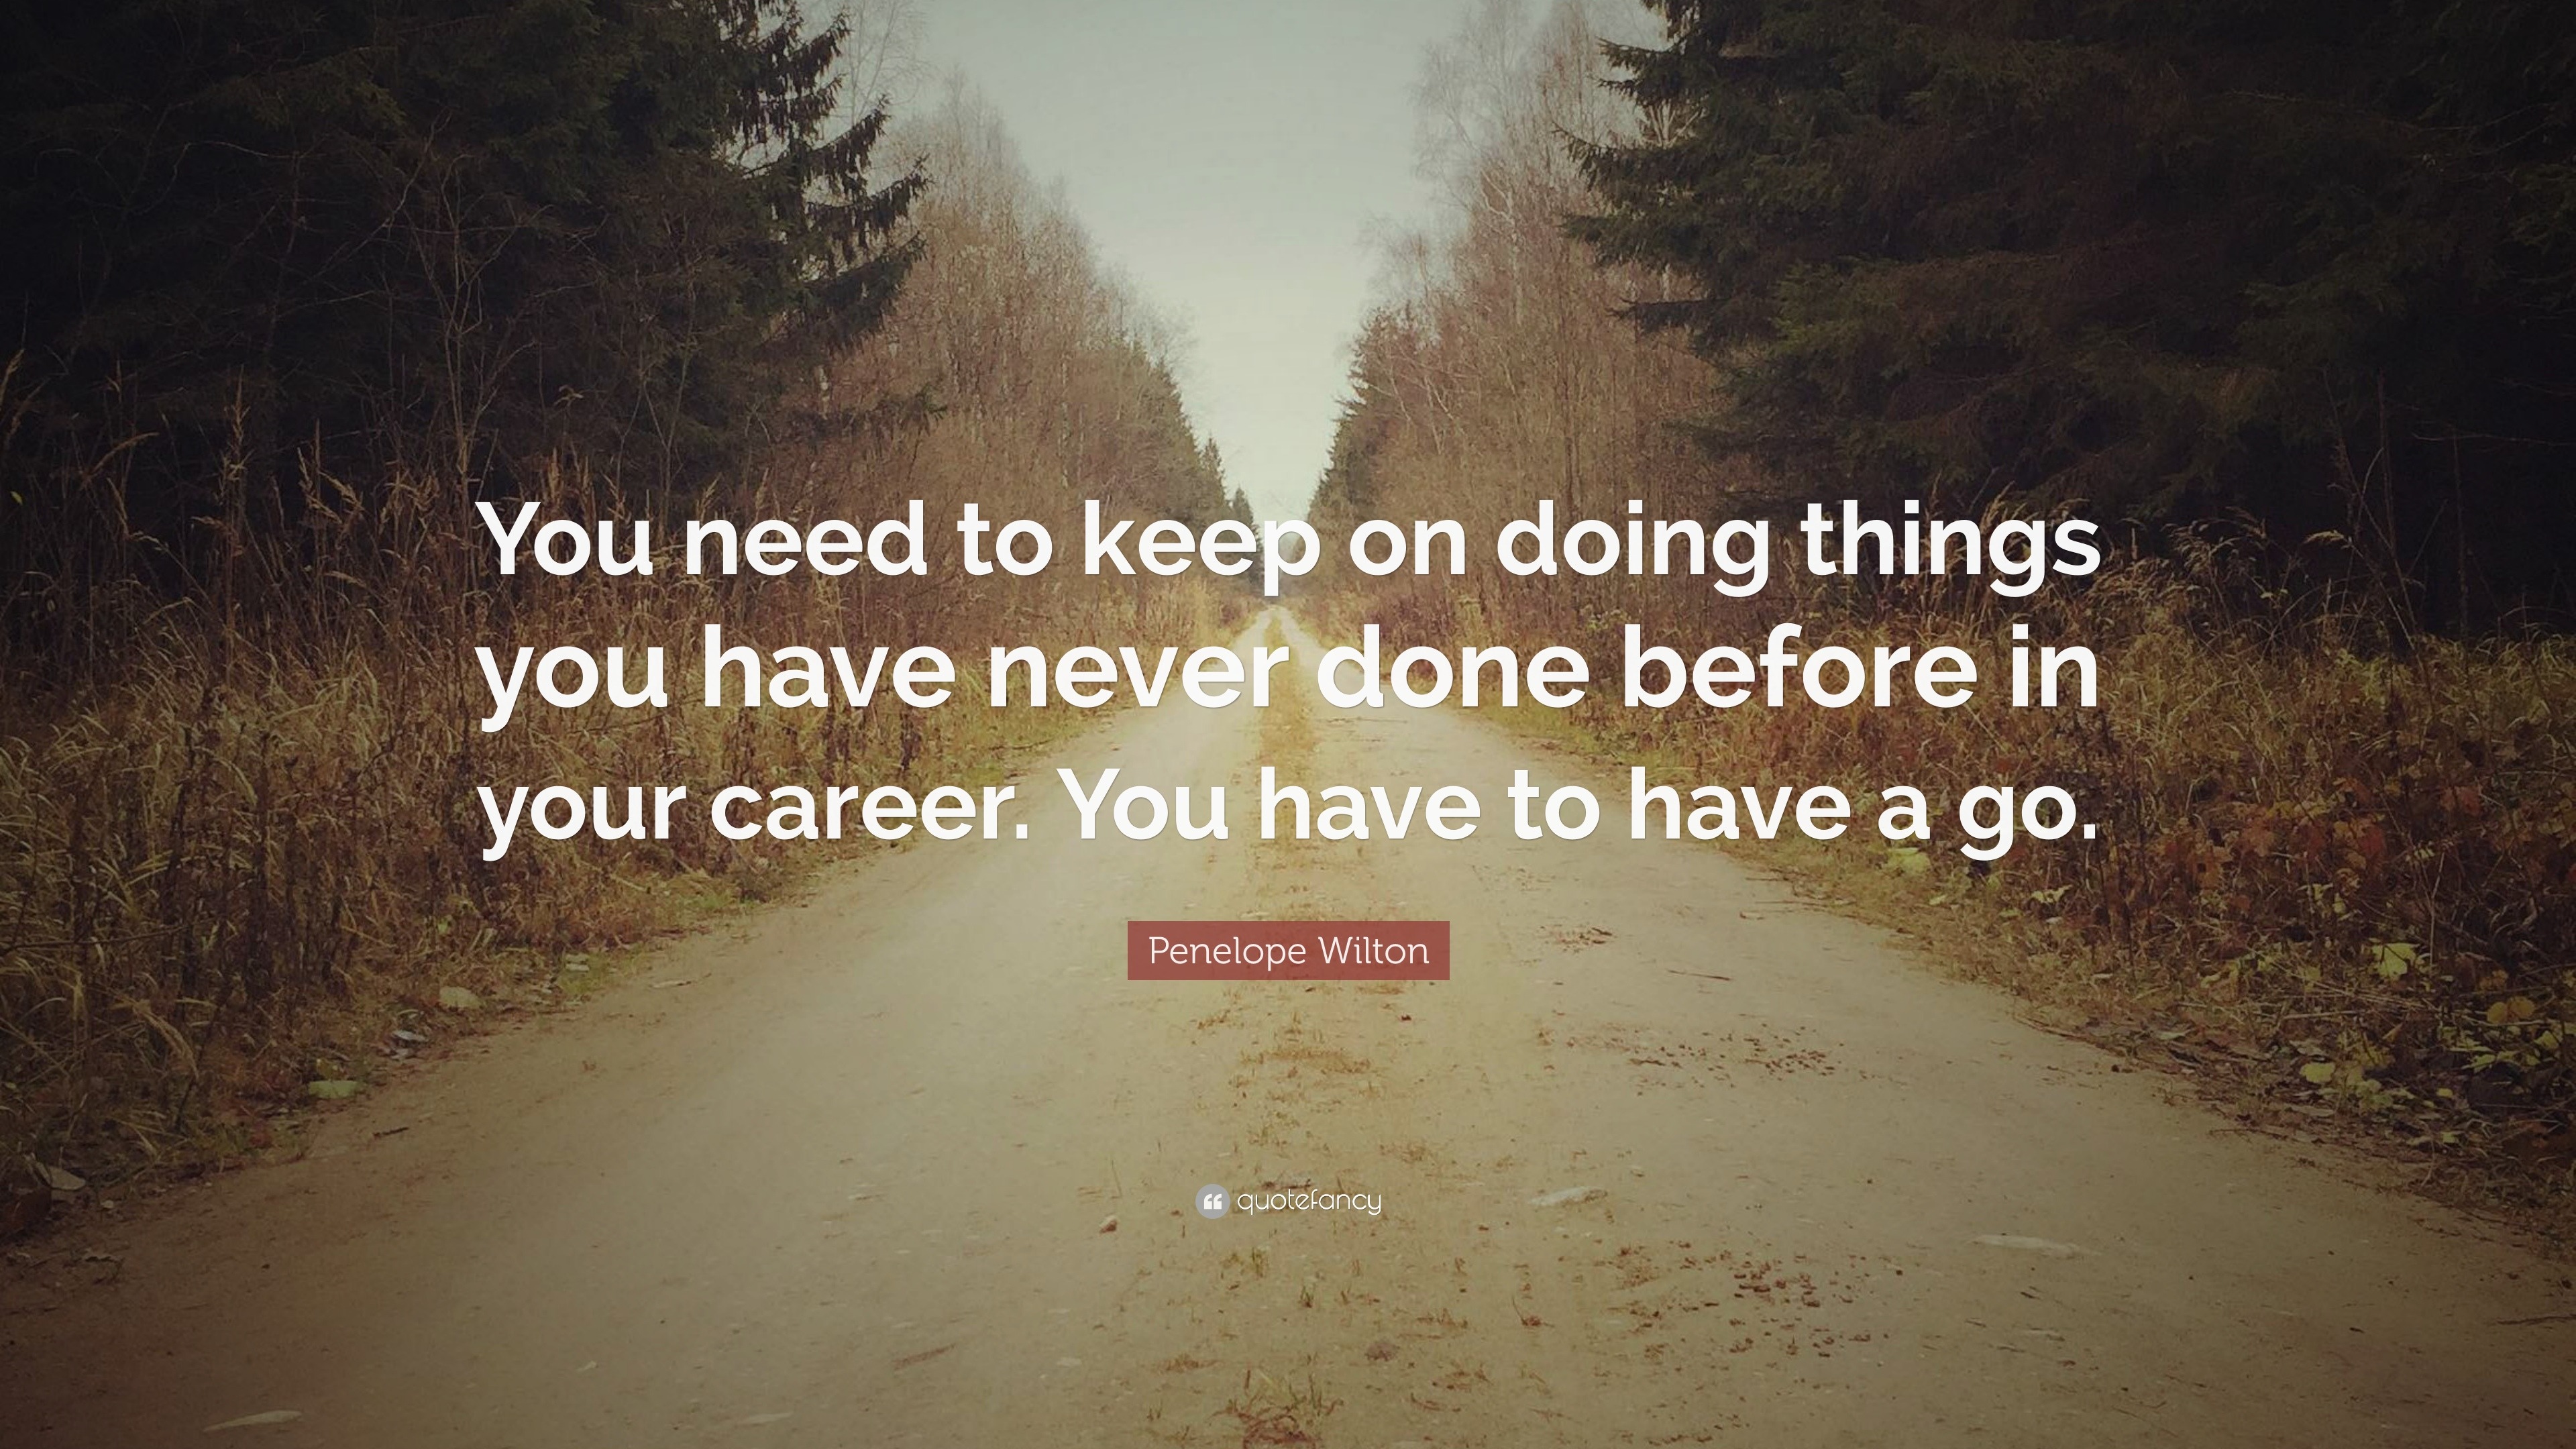 Penelope Wilton Quote: “You need to keep on doing things you have never ...